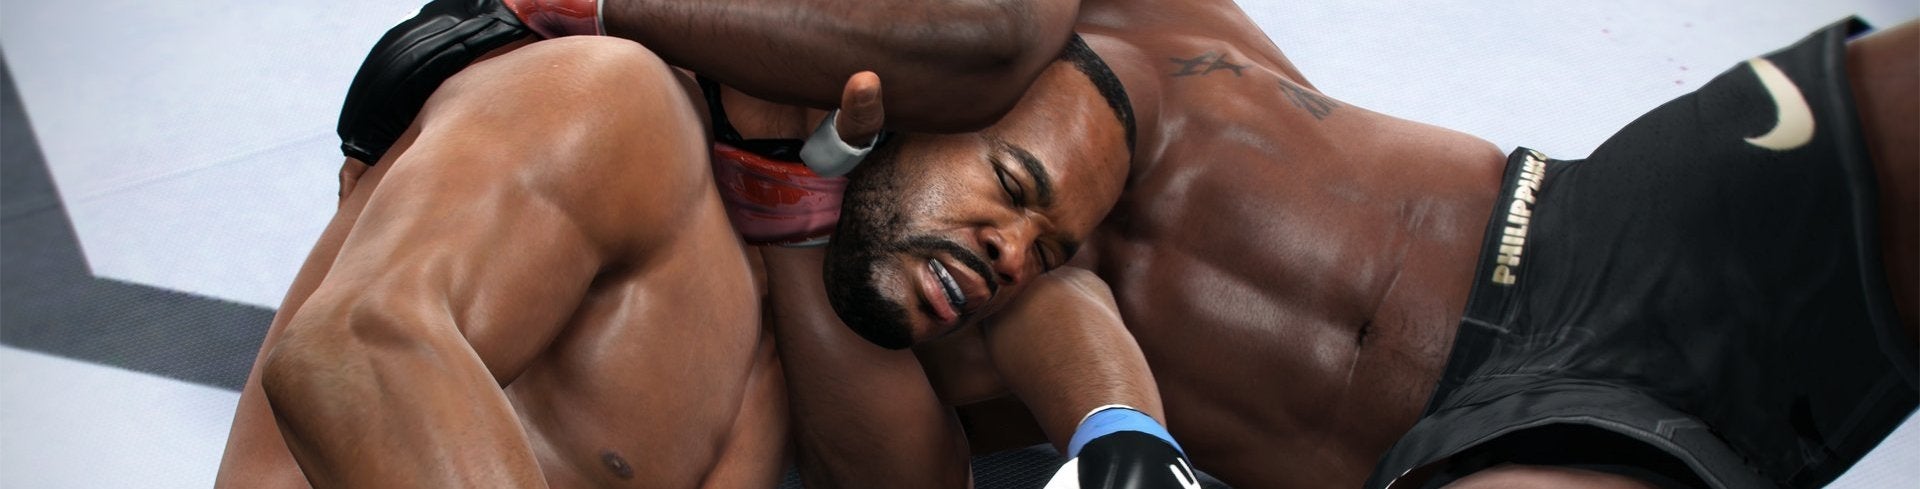 Image for Grappling is one of the oldest sports in the world - so why can't video games do it properly?